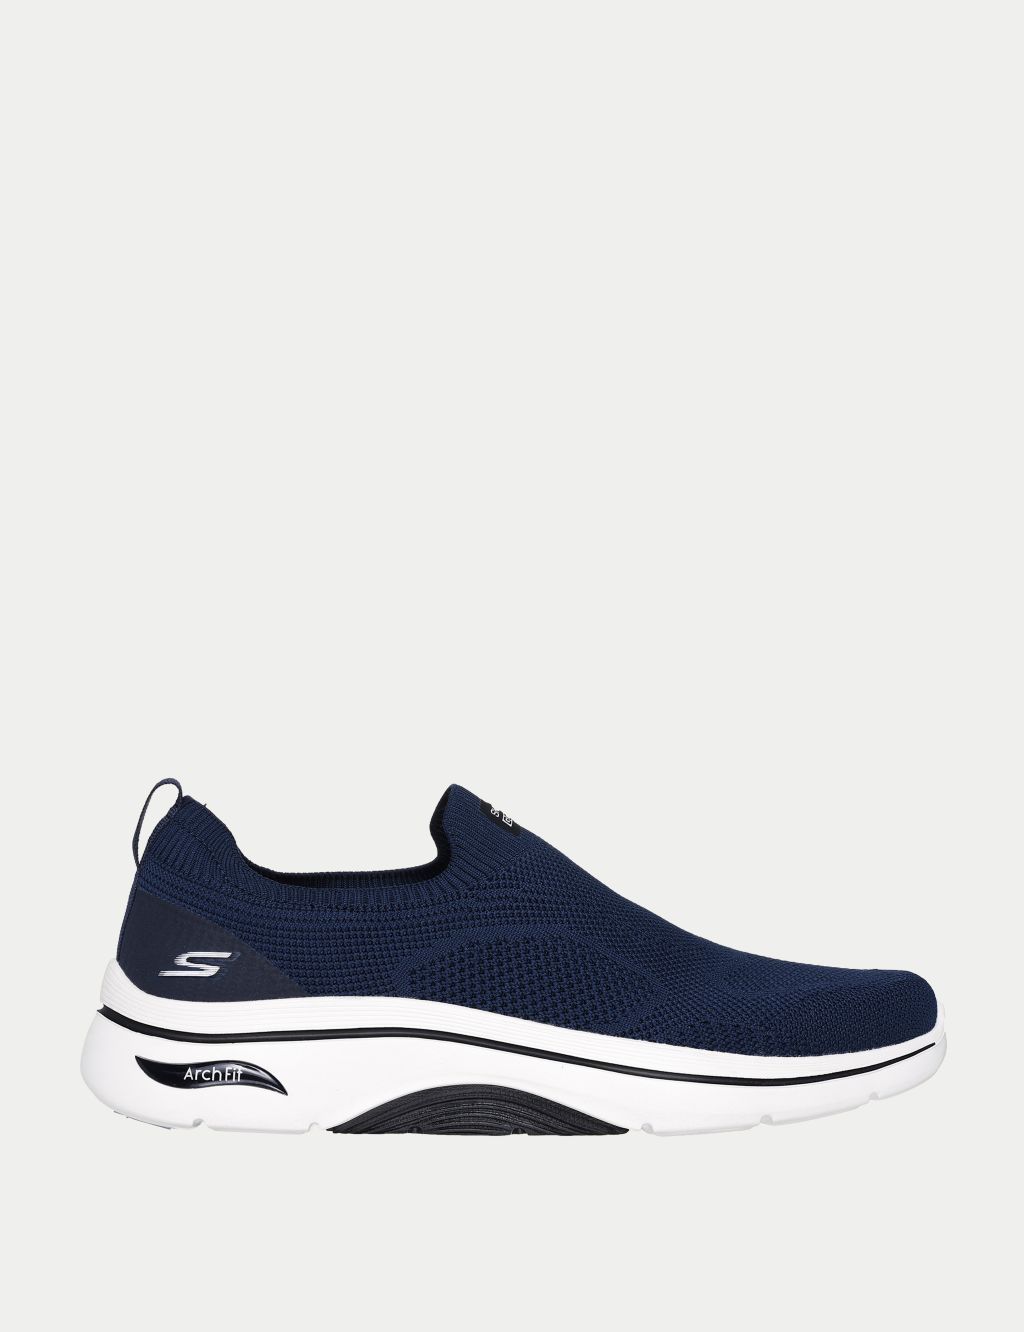 Go Walk Arch Fit 2.0 Slip-On Trainers